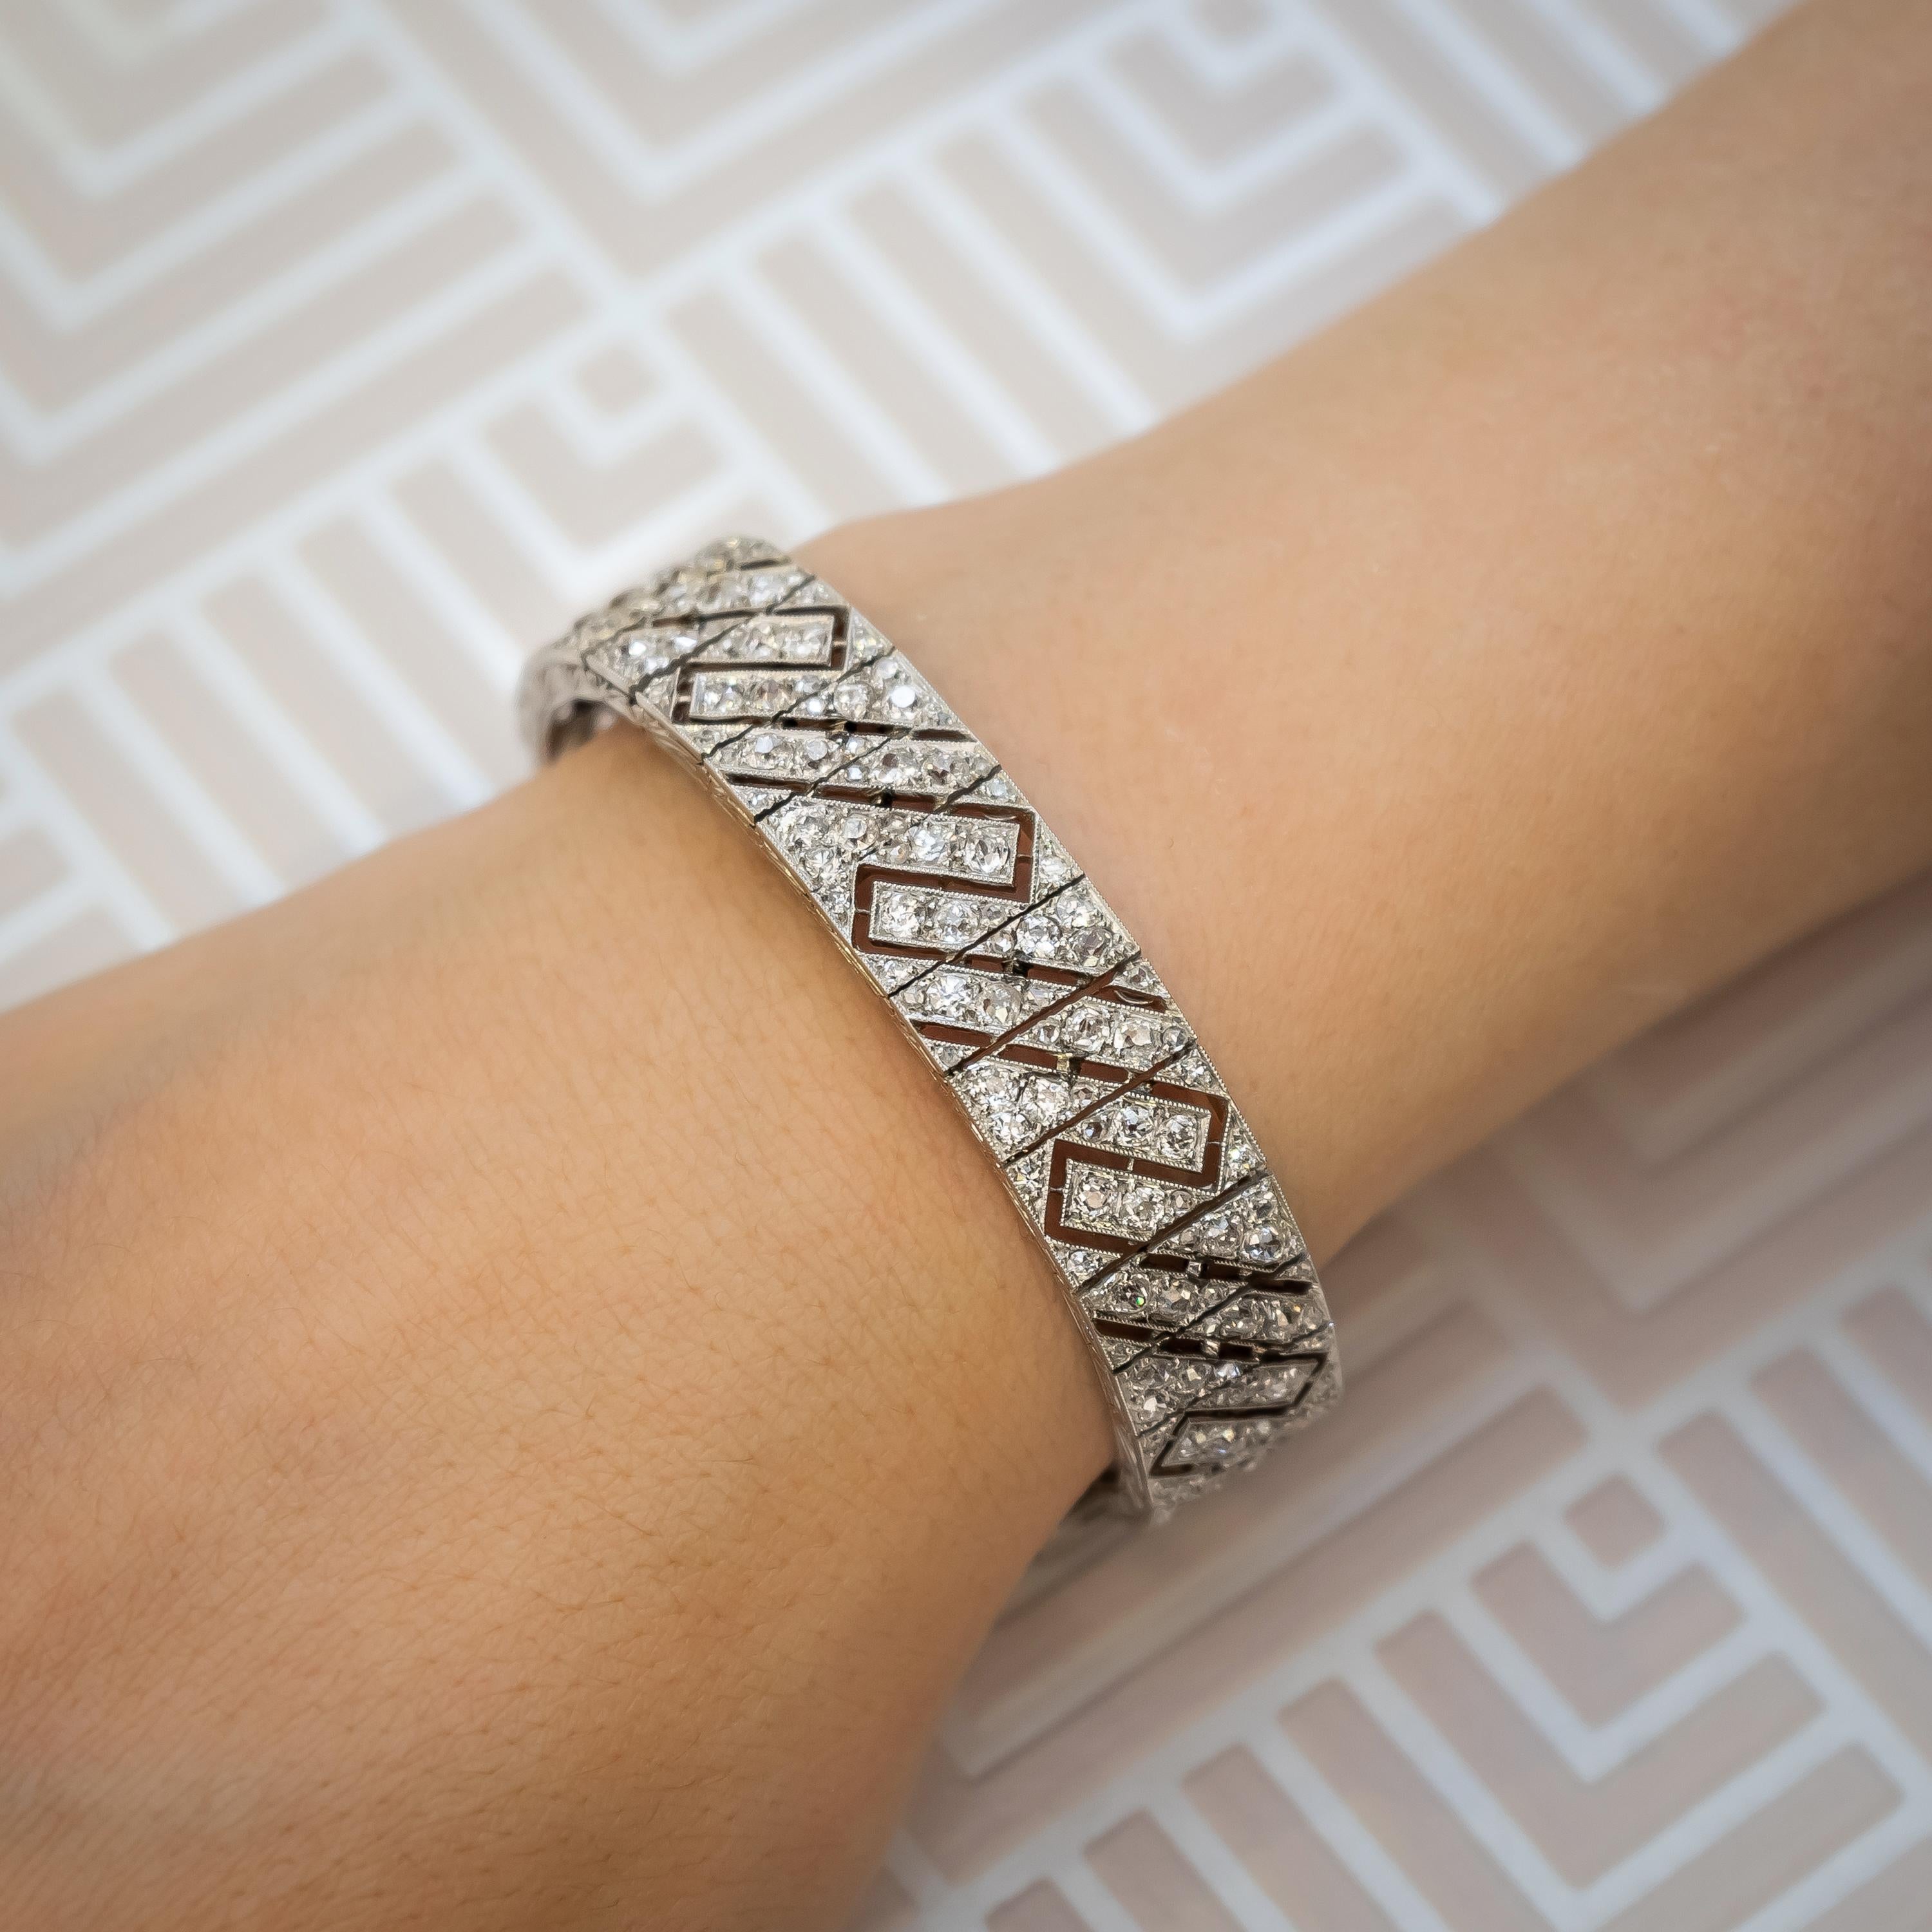 A Lacloche Frères, Art Deco diamond bracelet, set with old-cut diamonds, weighing approximately 14.50ct, in a geometric, diagonal design, of interlocking rows, with millegrain edges, with engraved sides, mounted in platinum, with French dog marks